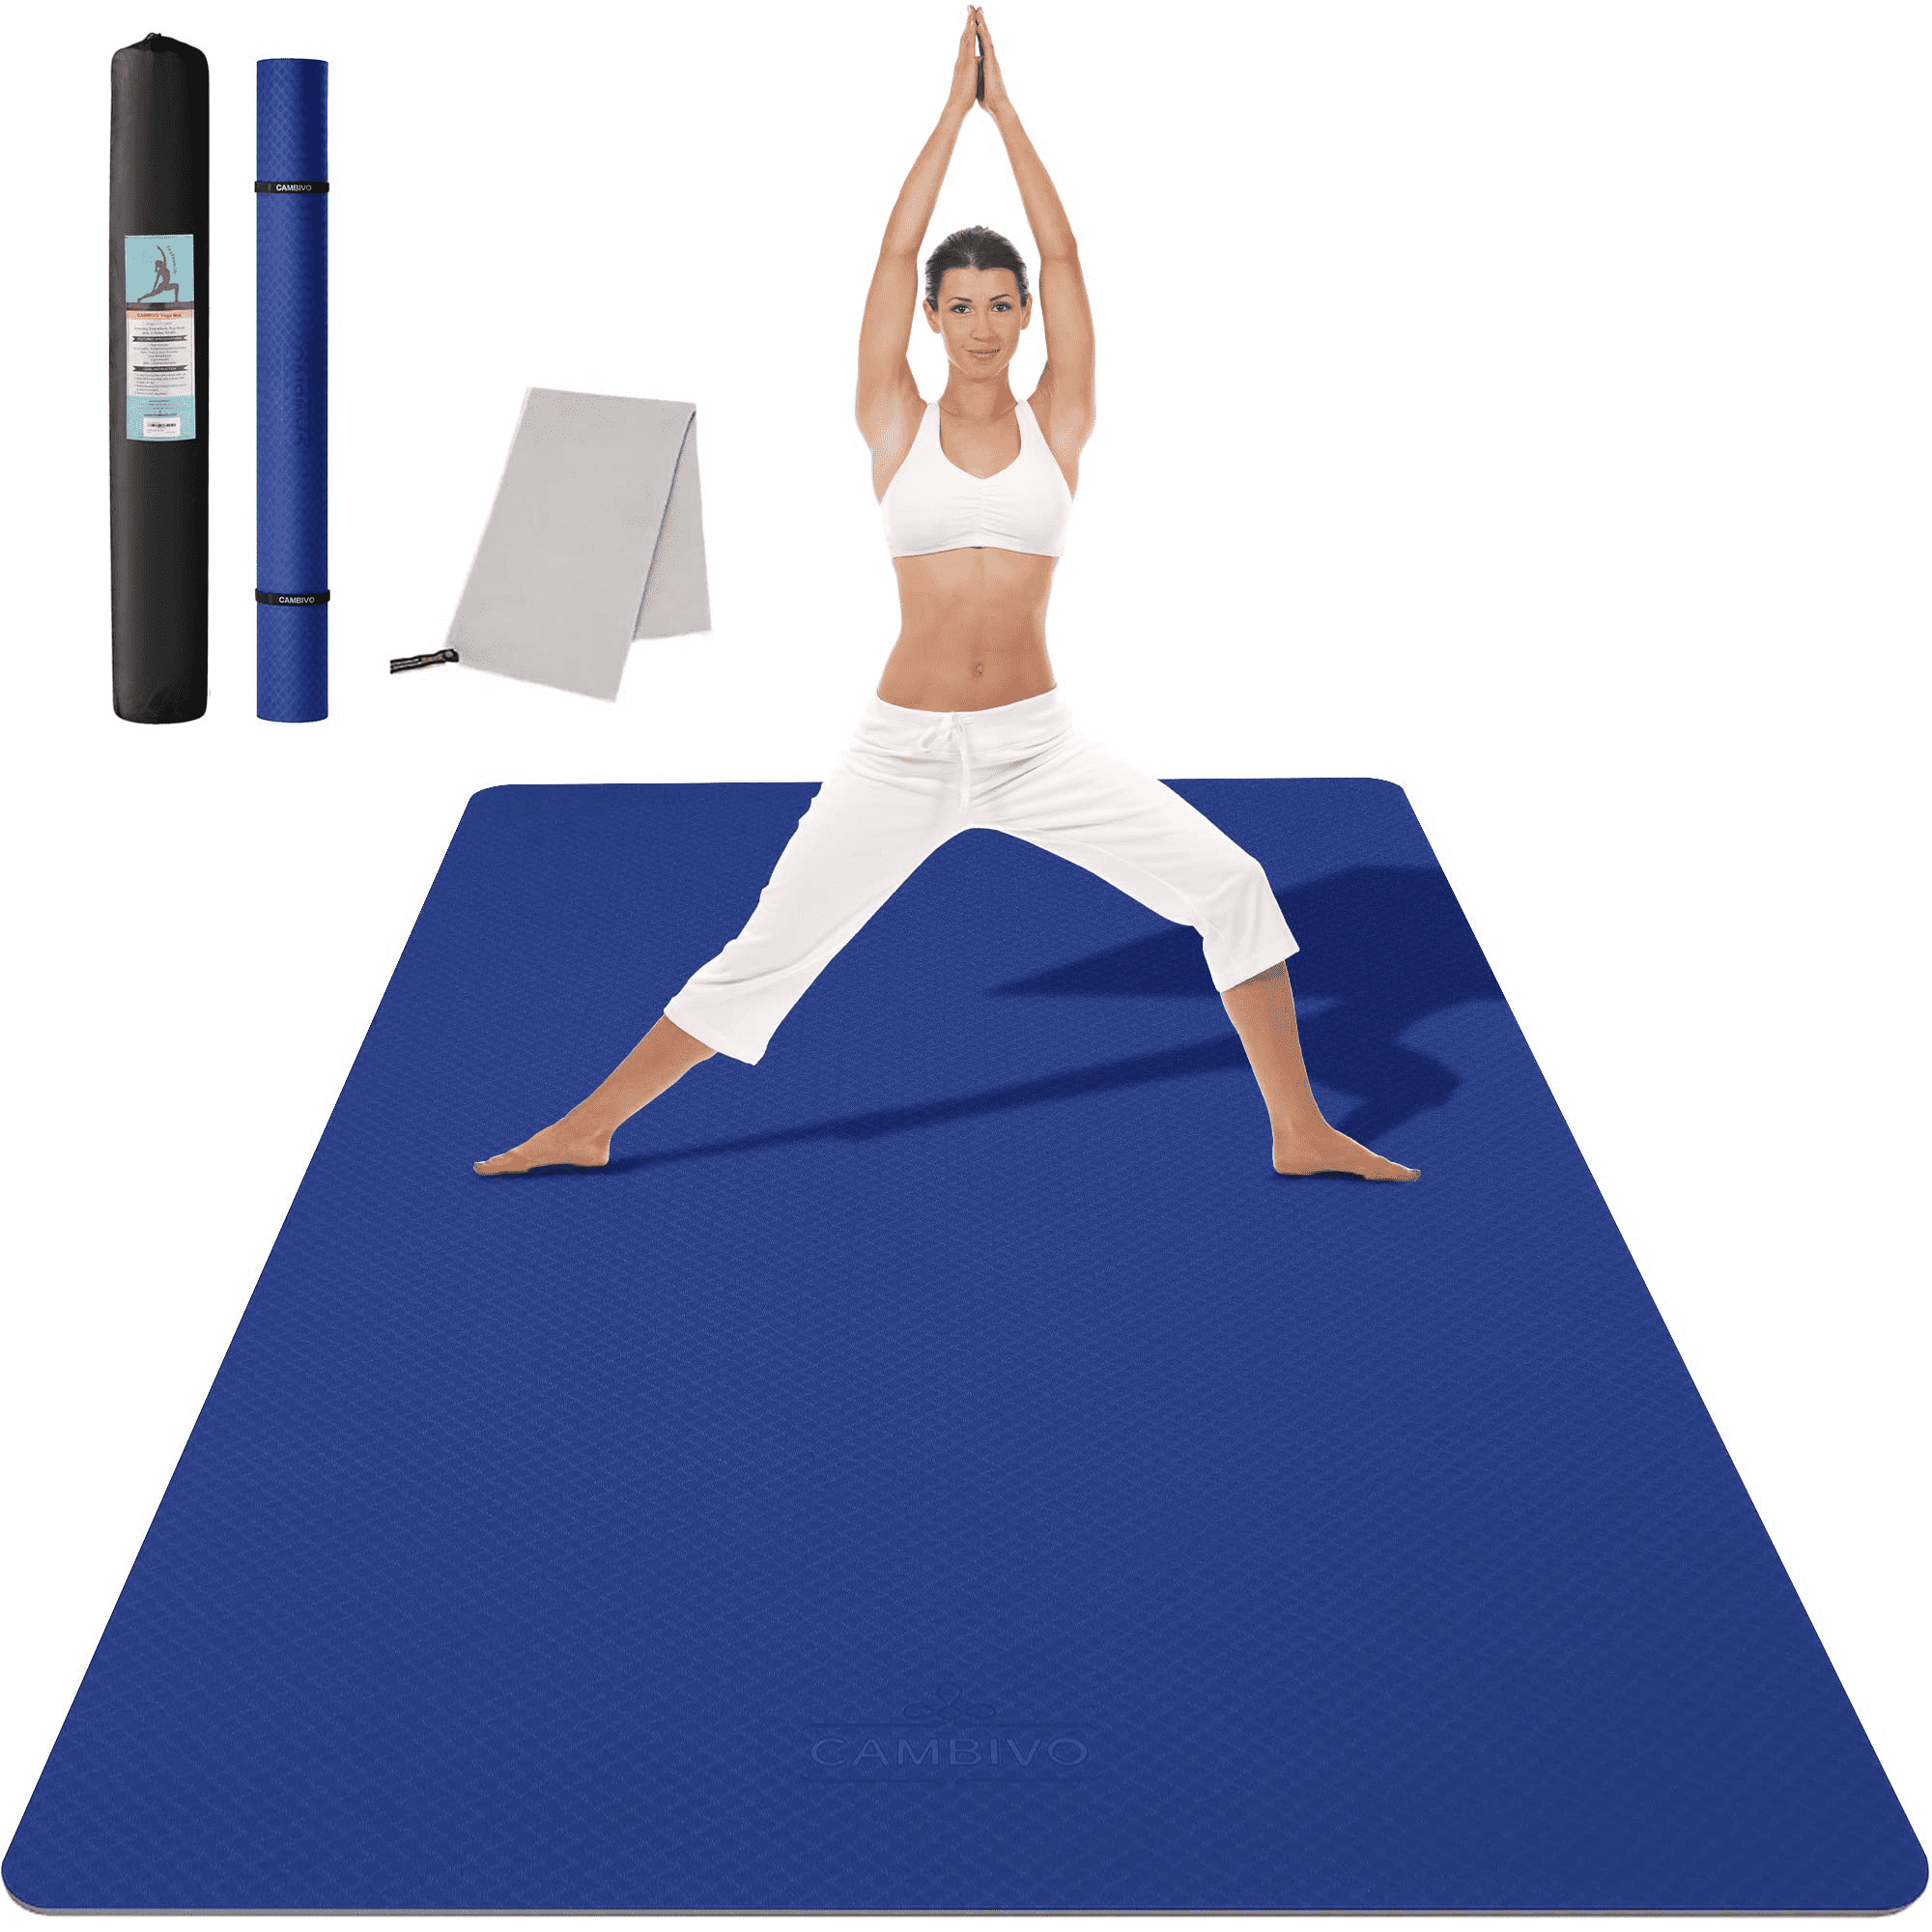 UMINEUX Extra Wide Yoga Mat 1/4 Thickness TPE Yoga Mats Non Slip, Green 